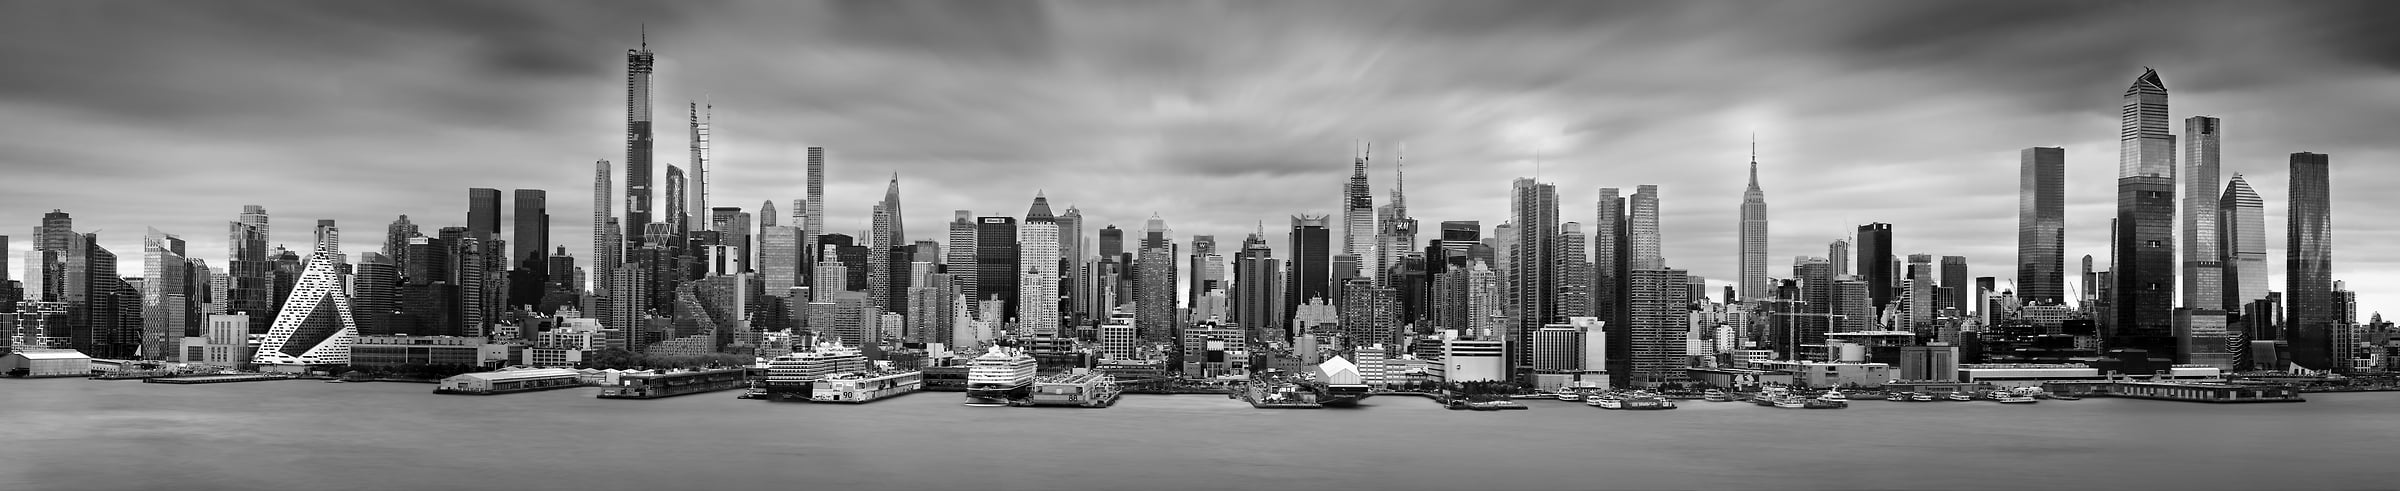 988 megapixels! A very high resolution, big VAST photo print of the New York skyline; black & white photograph created by Phil Crawshay in Weehawken, New Jersey.